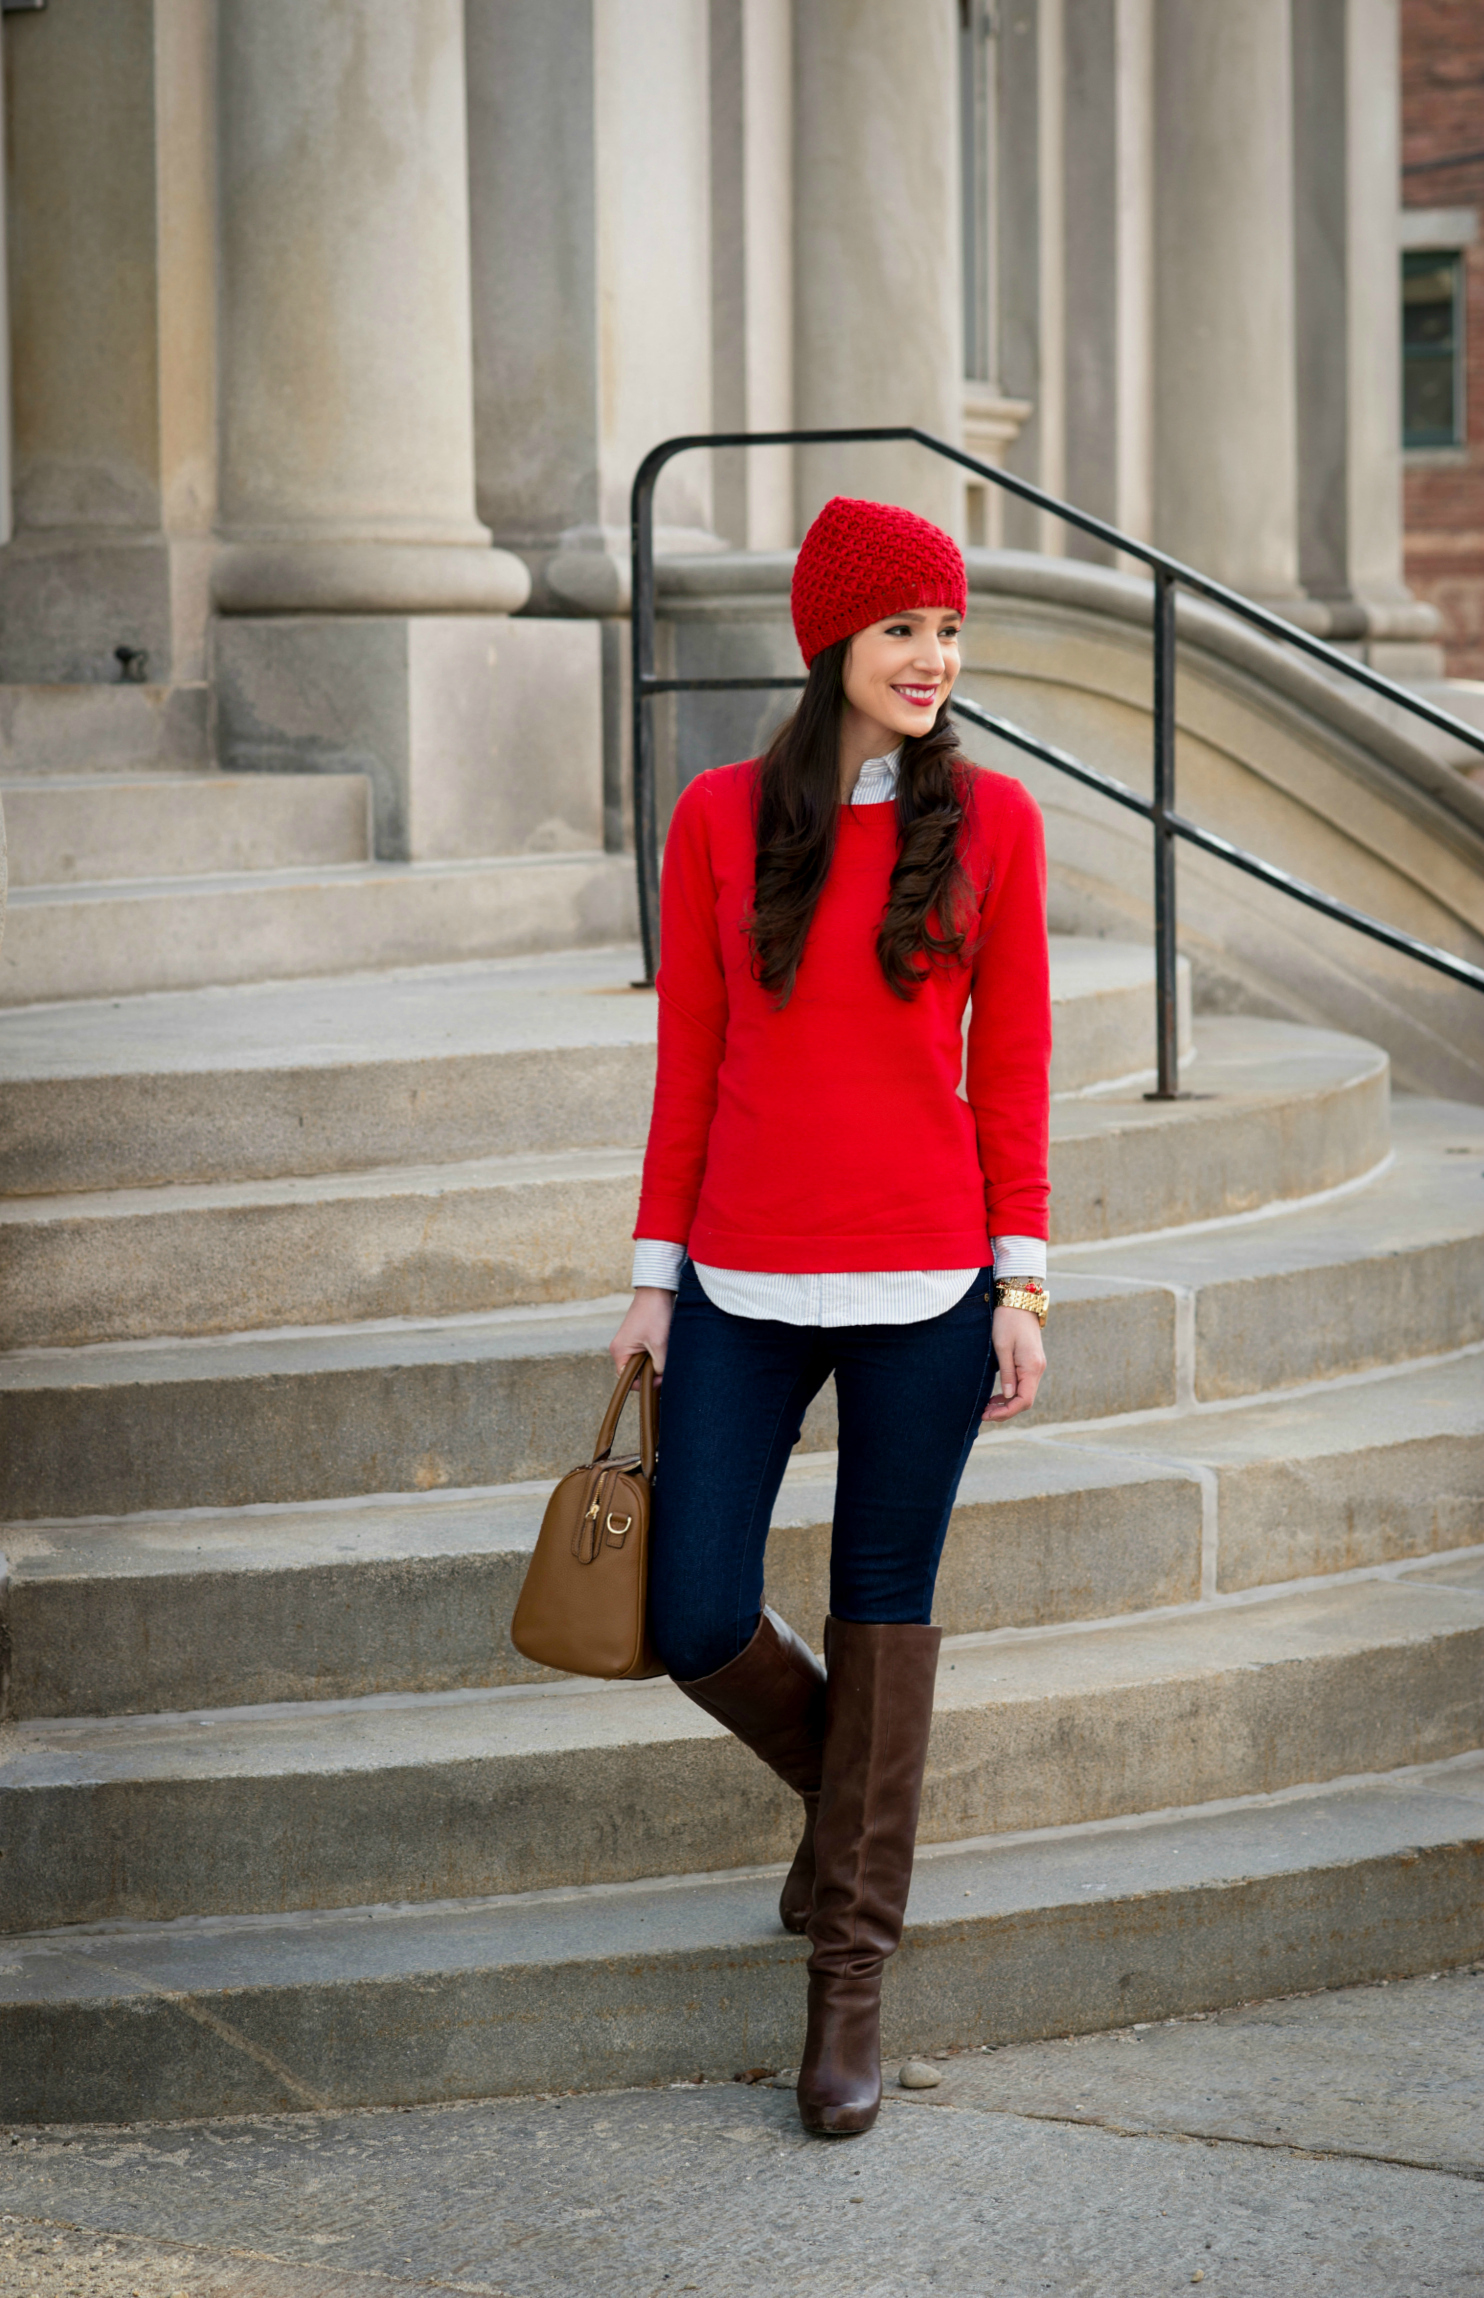 J.Crew Factory Red Crewneck Sweater and Striped Oxford